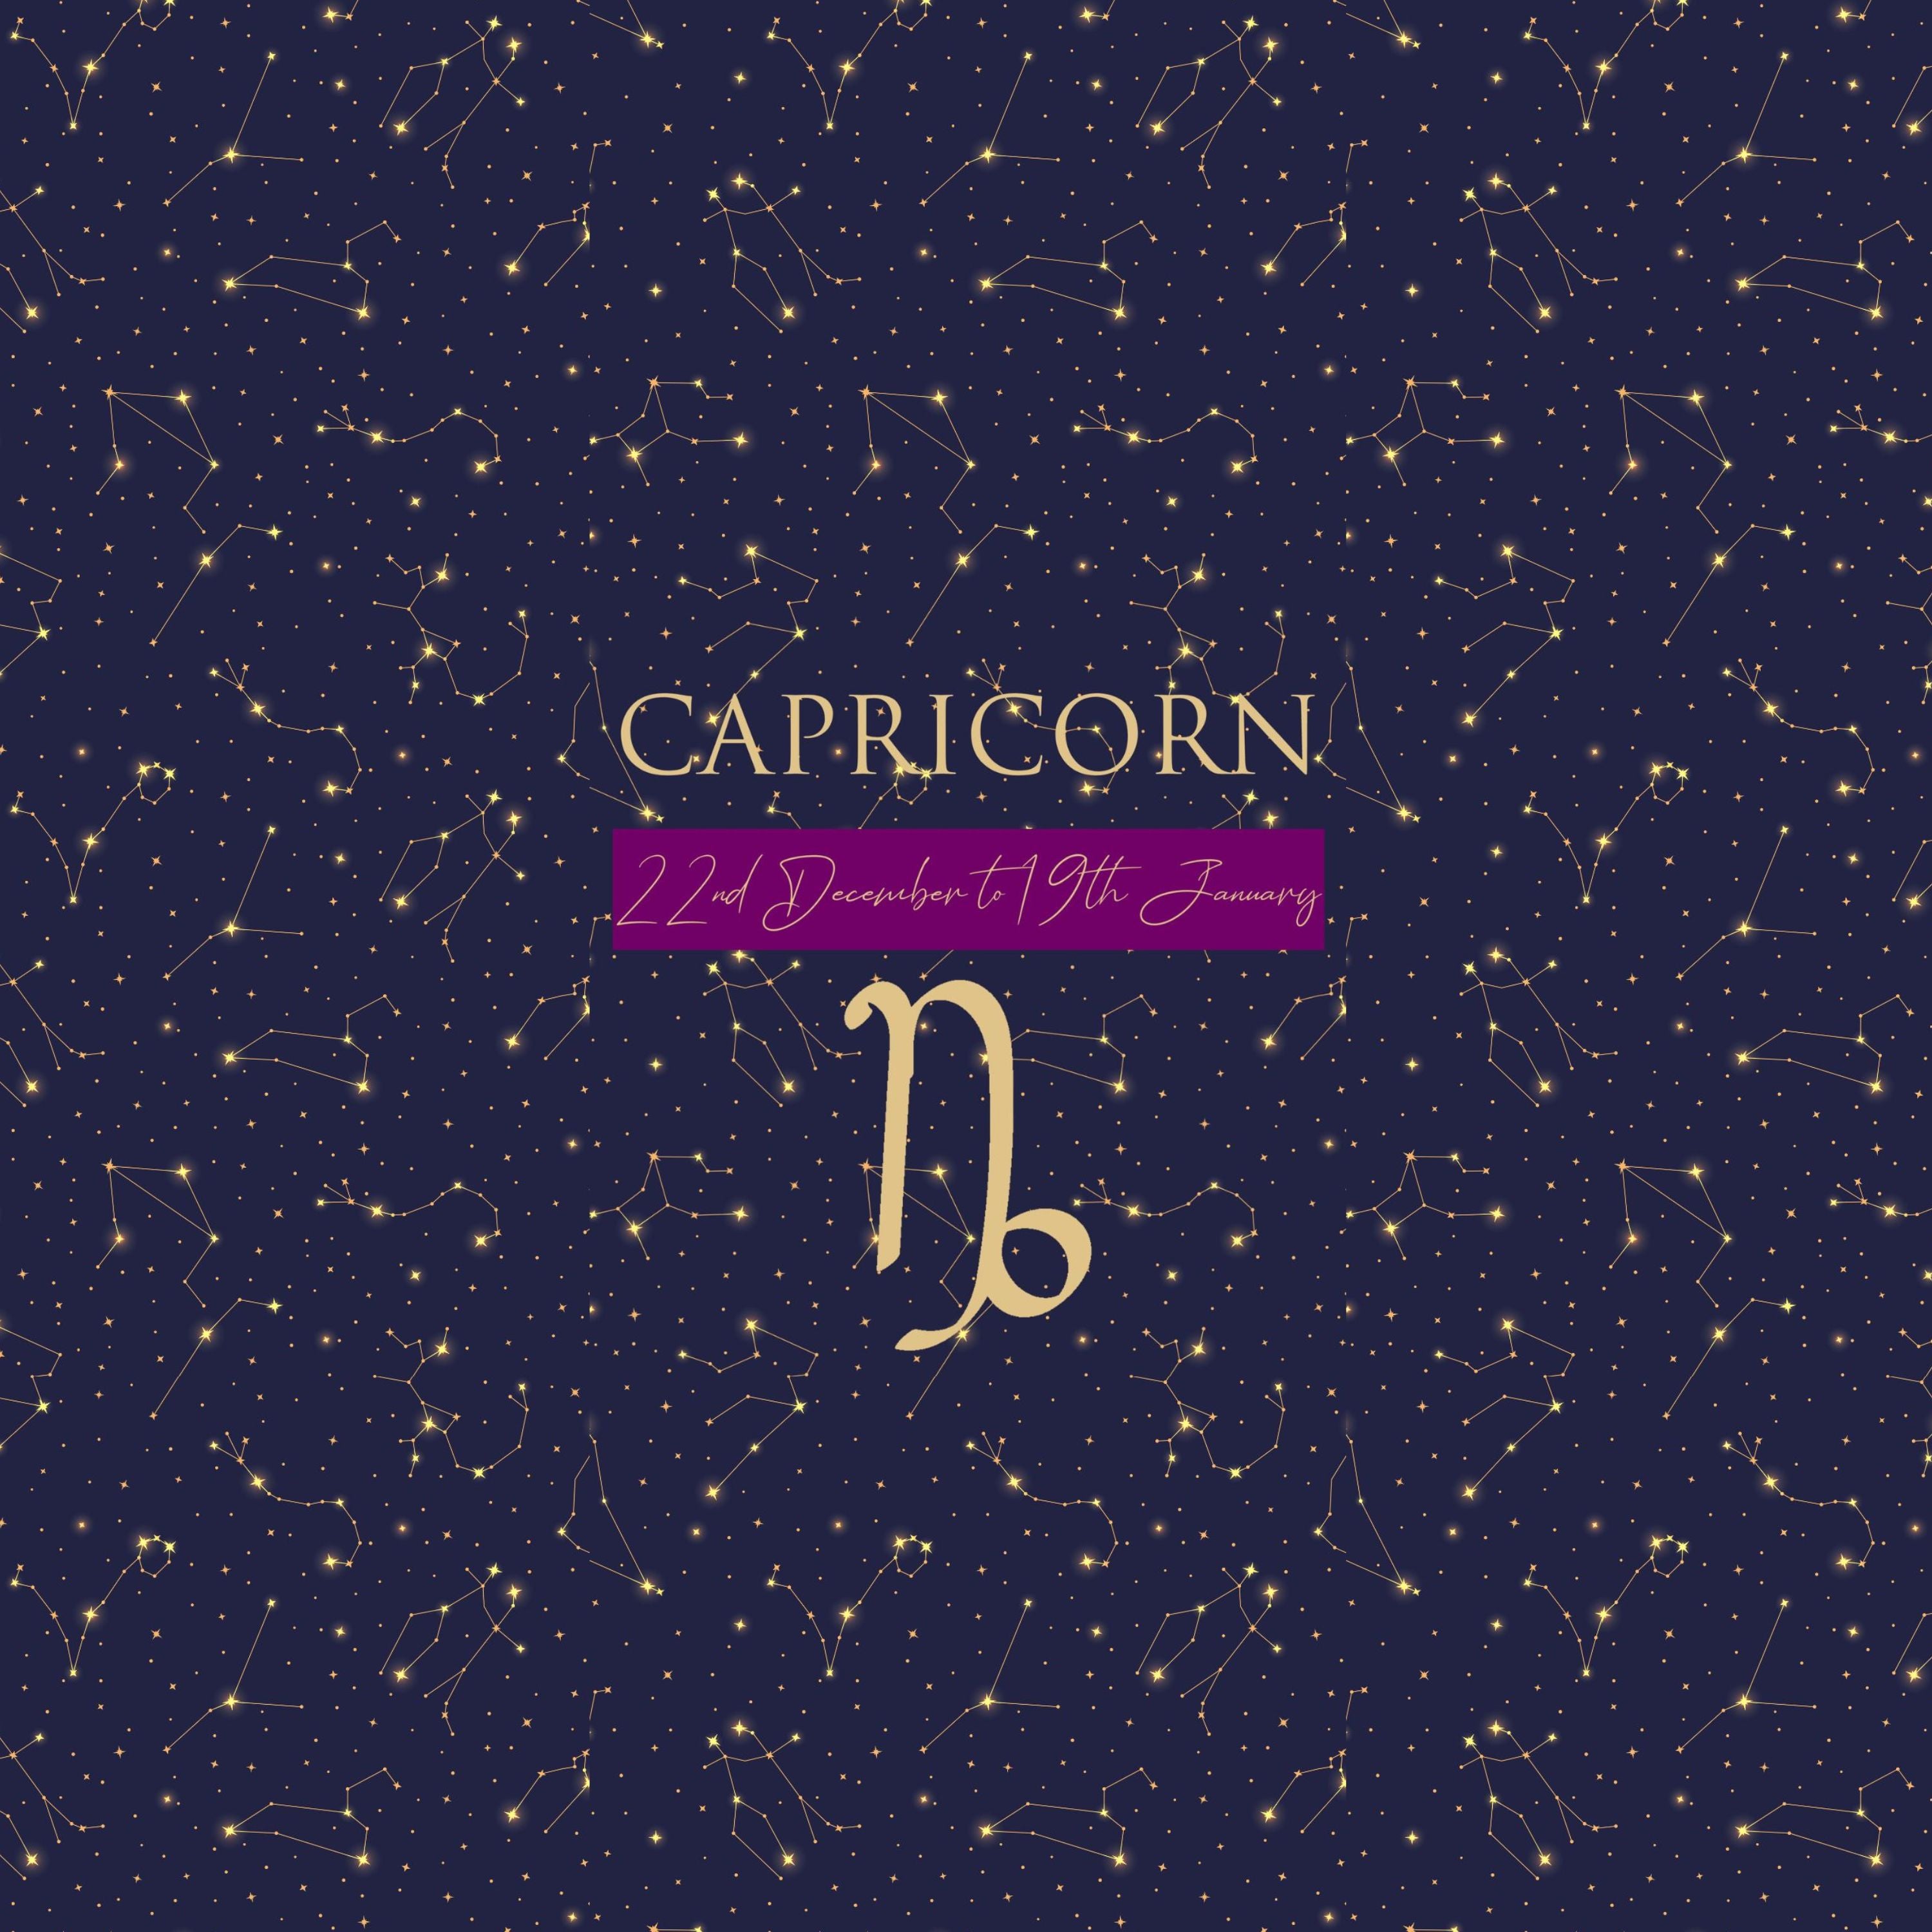 Capricorn: 7 nourishing stones for this sign, Astrologer recommended